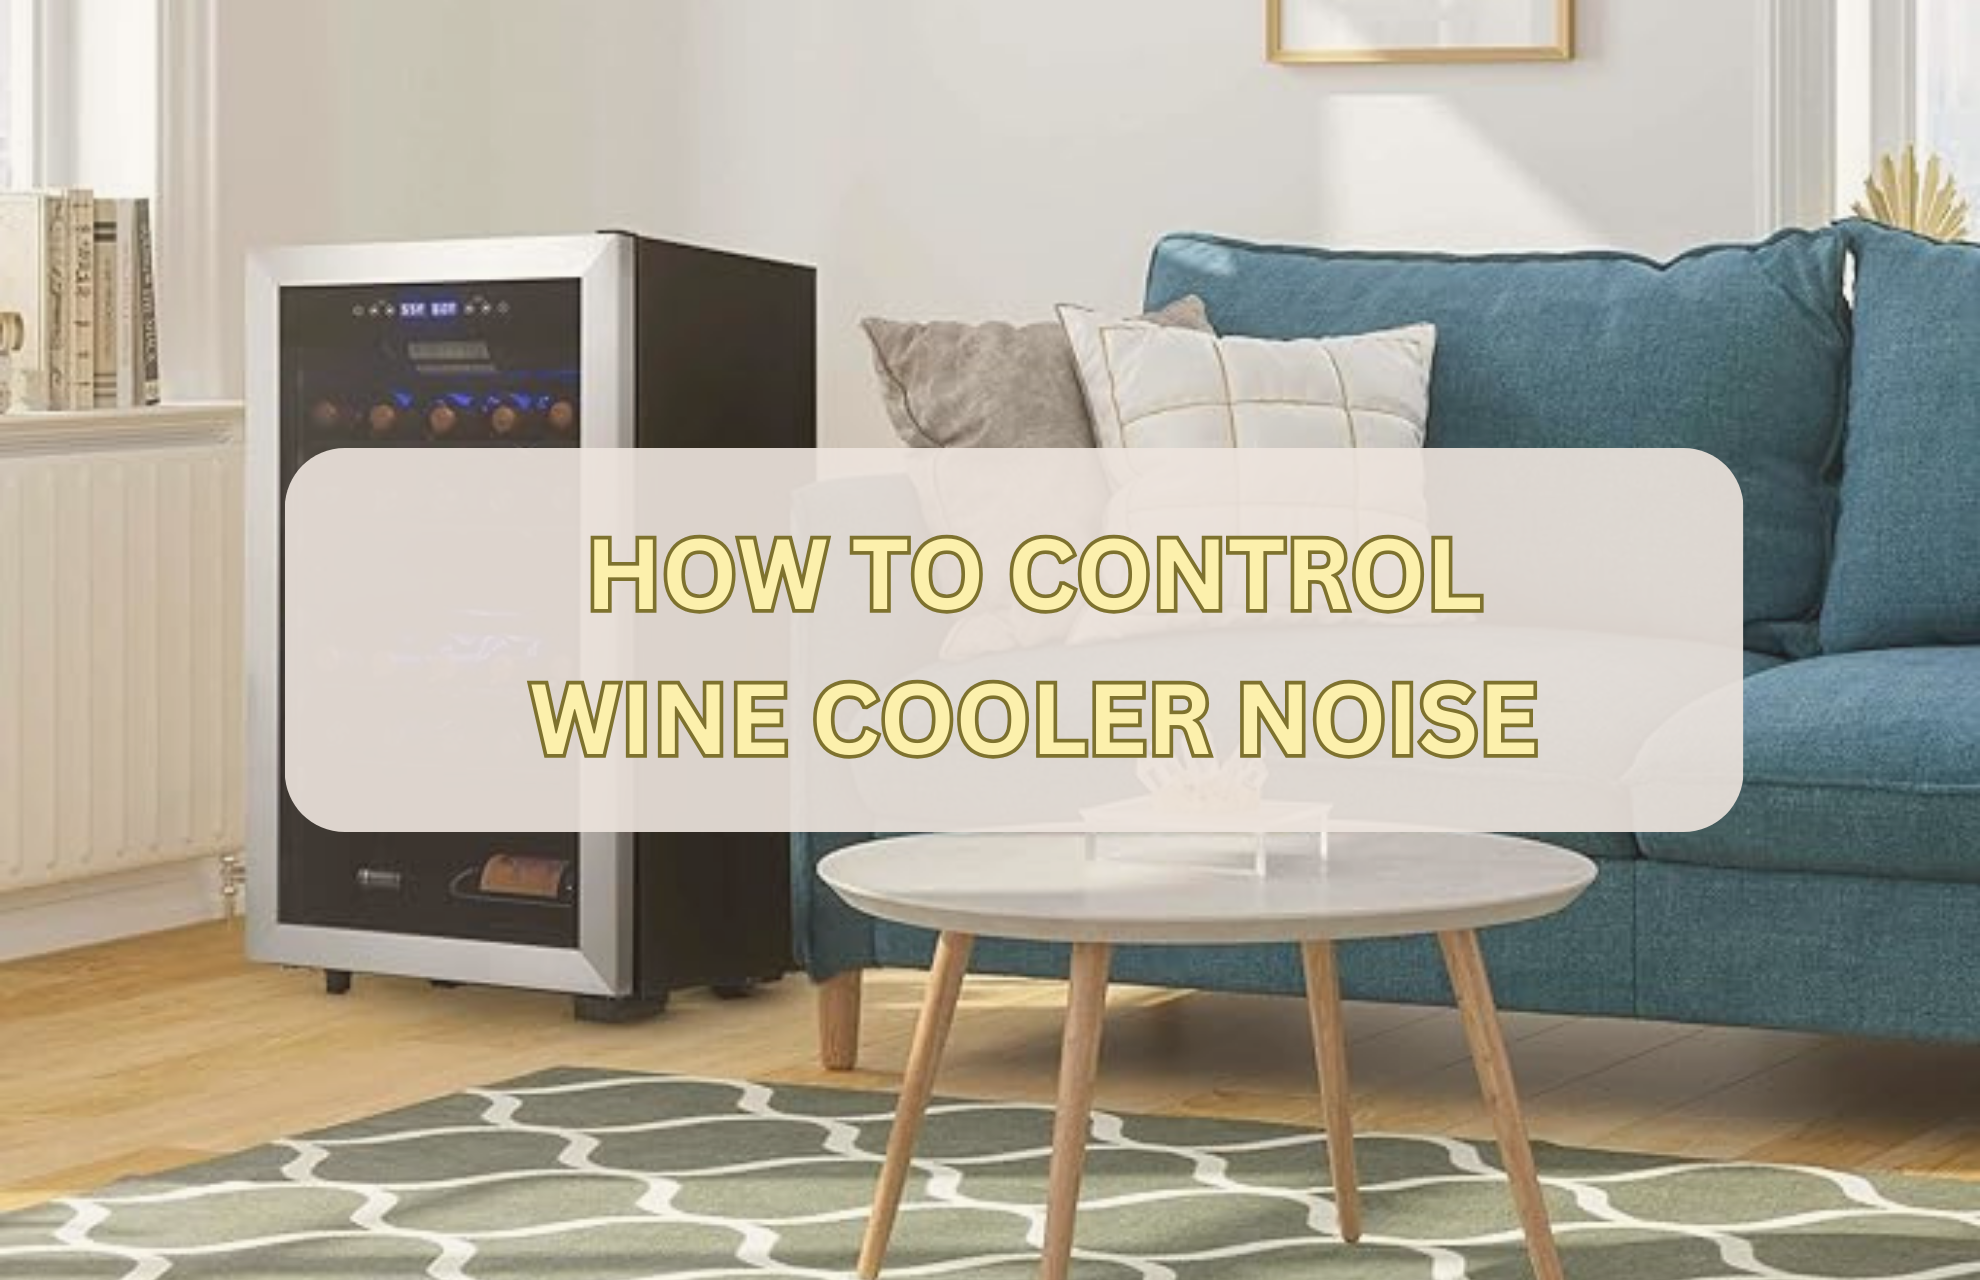 HOW TO CONTROL WINE COOLER NOISE